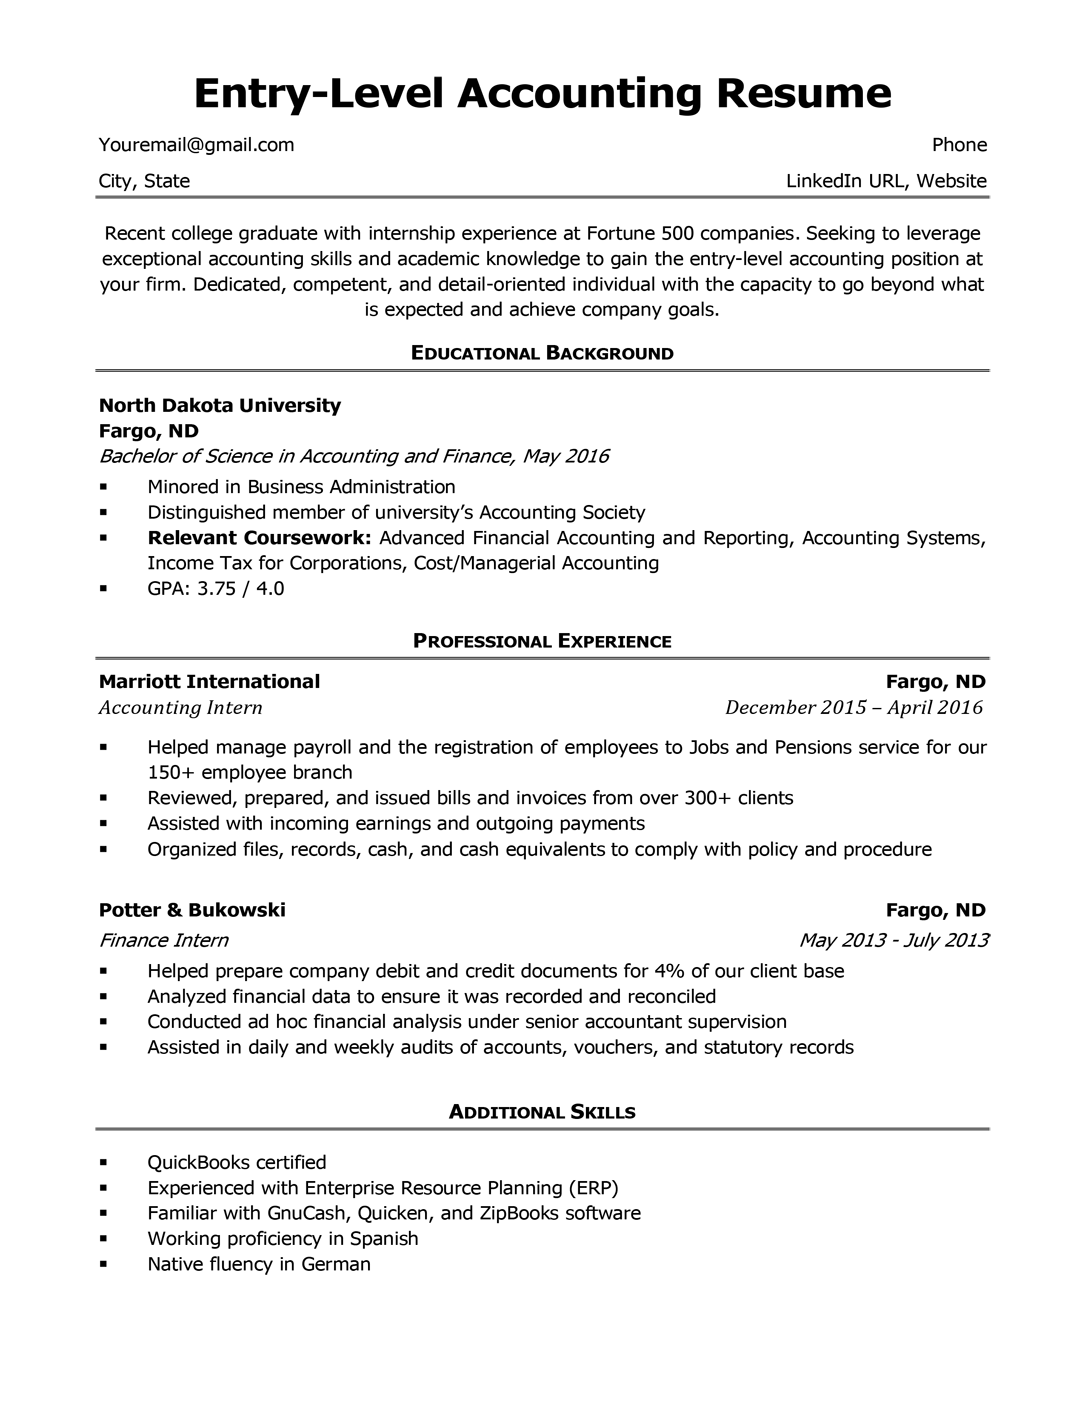 Entry-level accounting resume sample